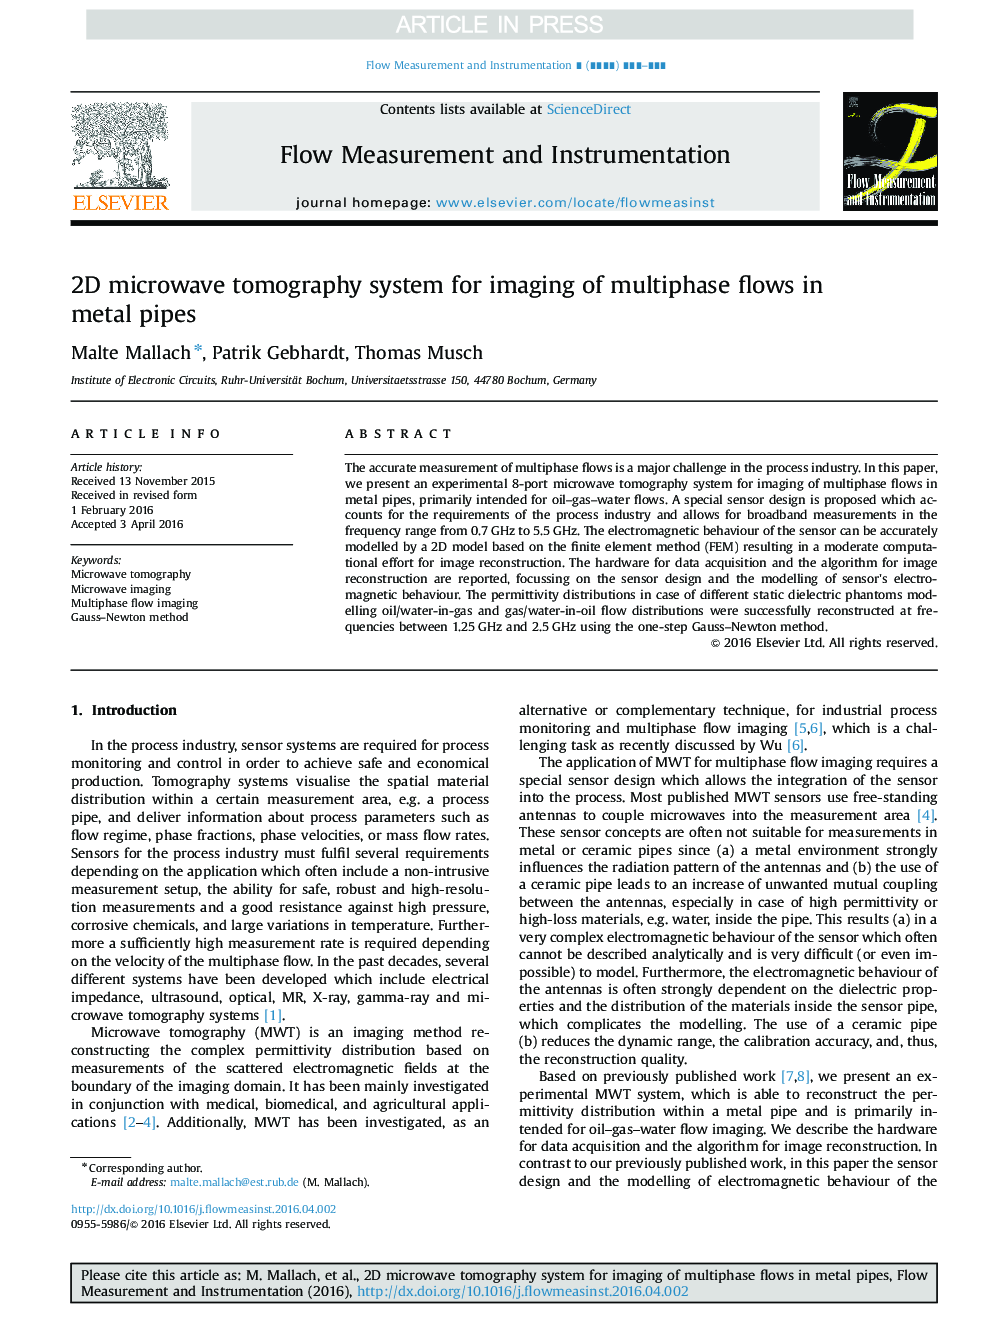 2D microwave tomography system for imaging of multiphase flows in metal pipes